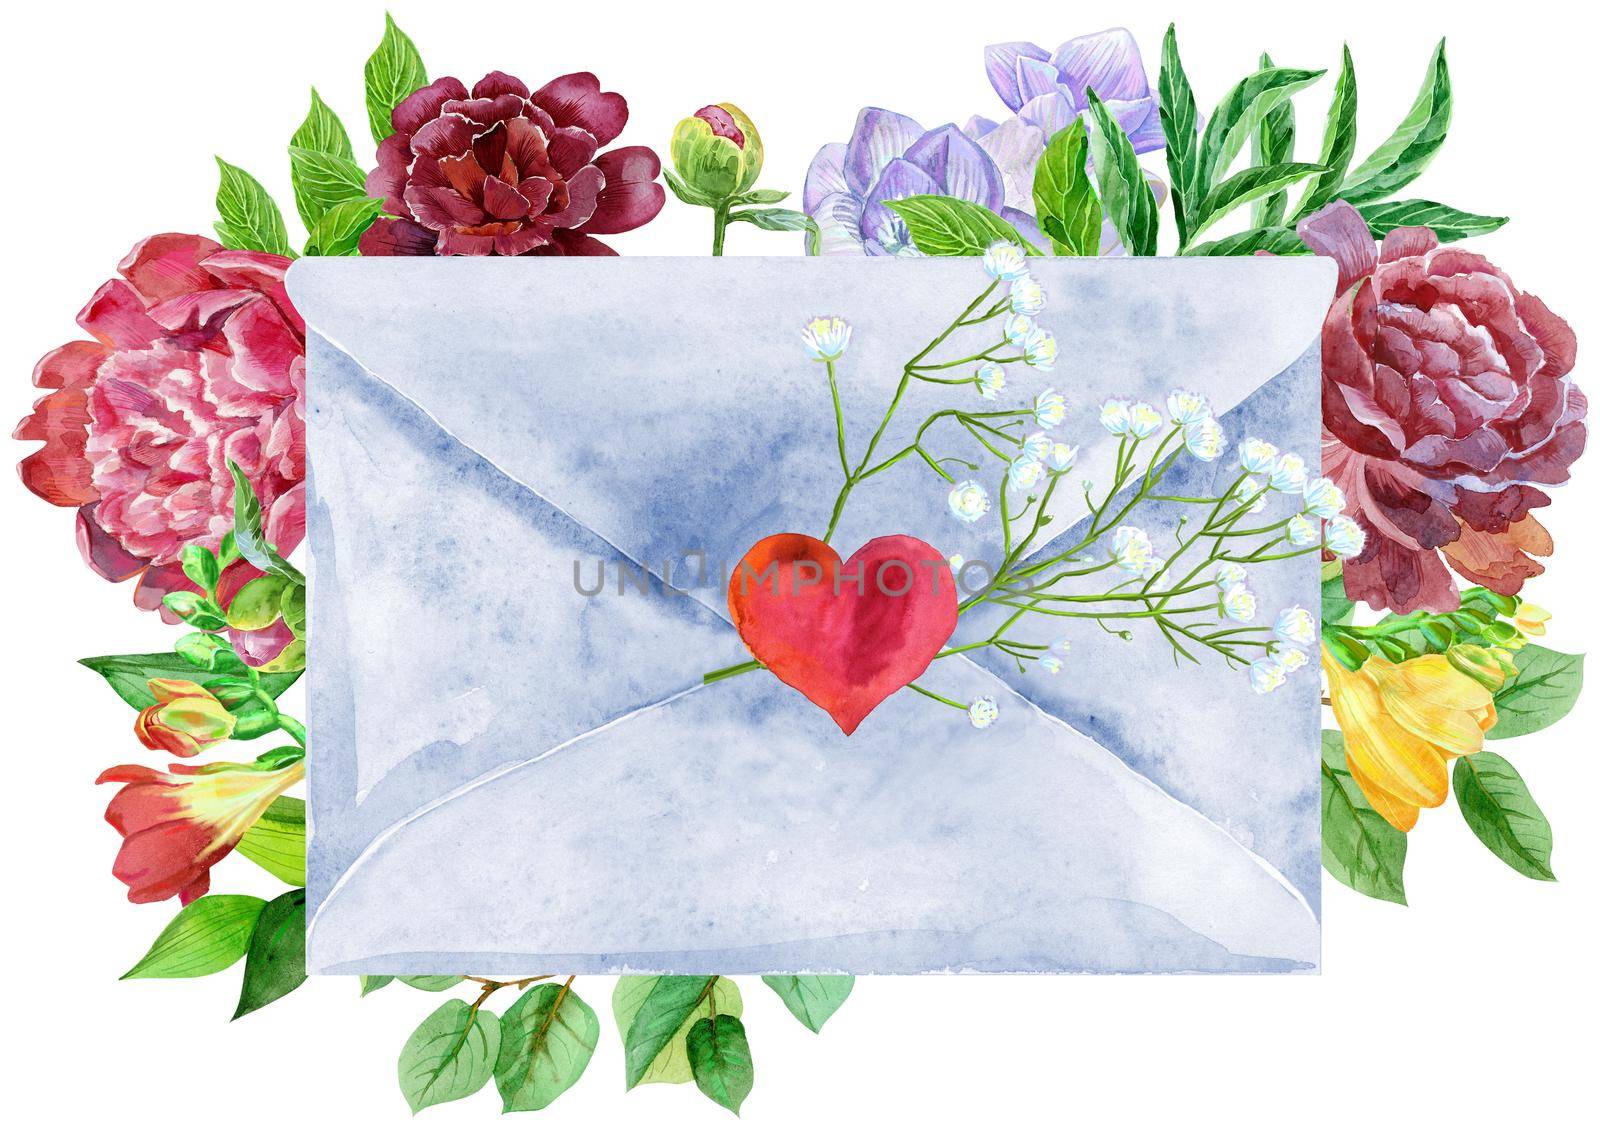 Watercolor hand-drawn illustration of an envelope with red heart and flowers on a white background isolated